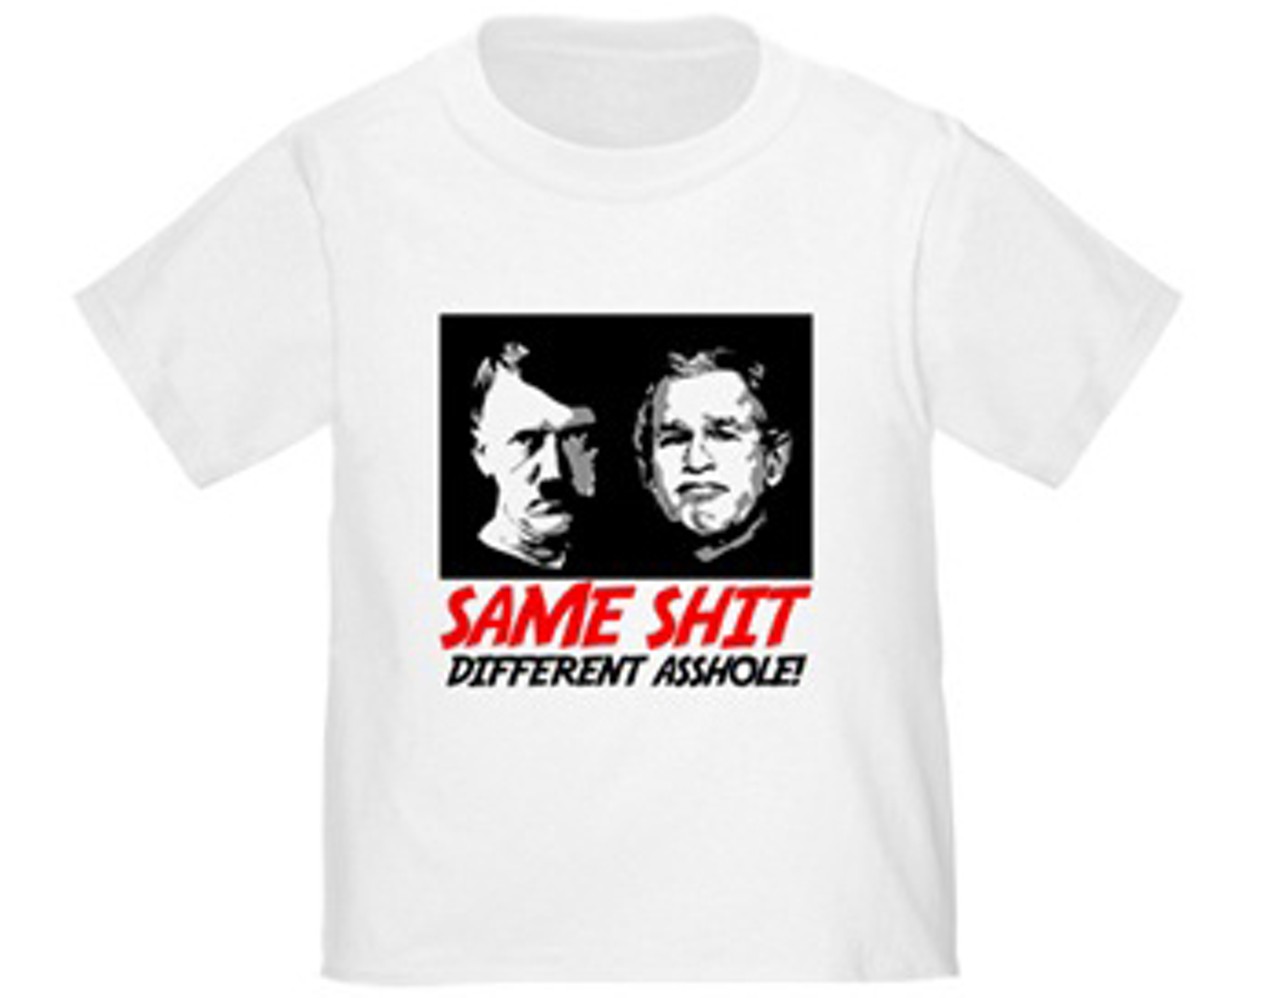 "Bush Sux" T-Shirts
By the time junior or cousin Tim gets this shirt or any of the other 1,000 similar designs, it'll be relevant for about a month. Resist the urge because it's the "easy choice" for your liberal relative.